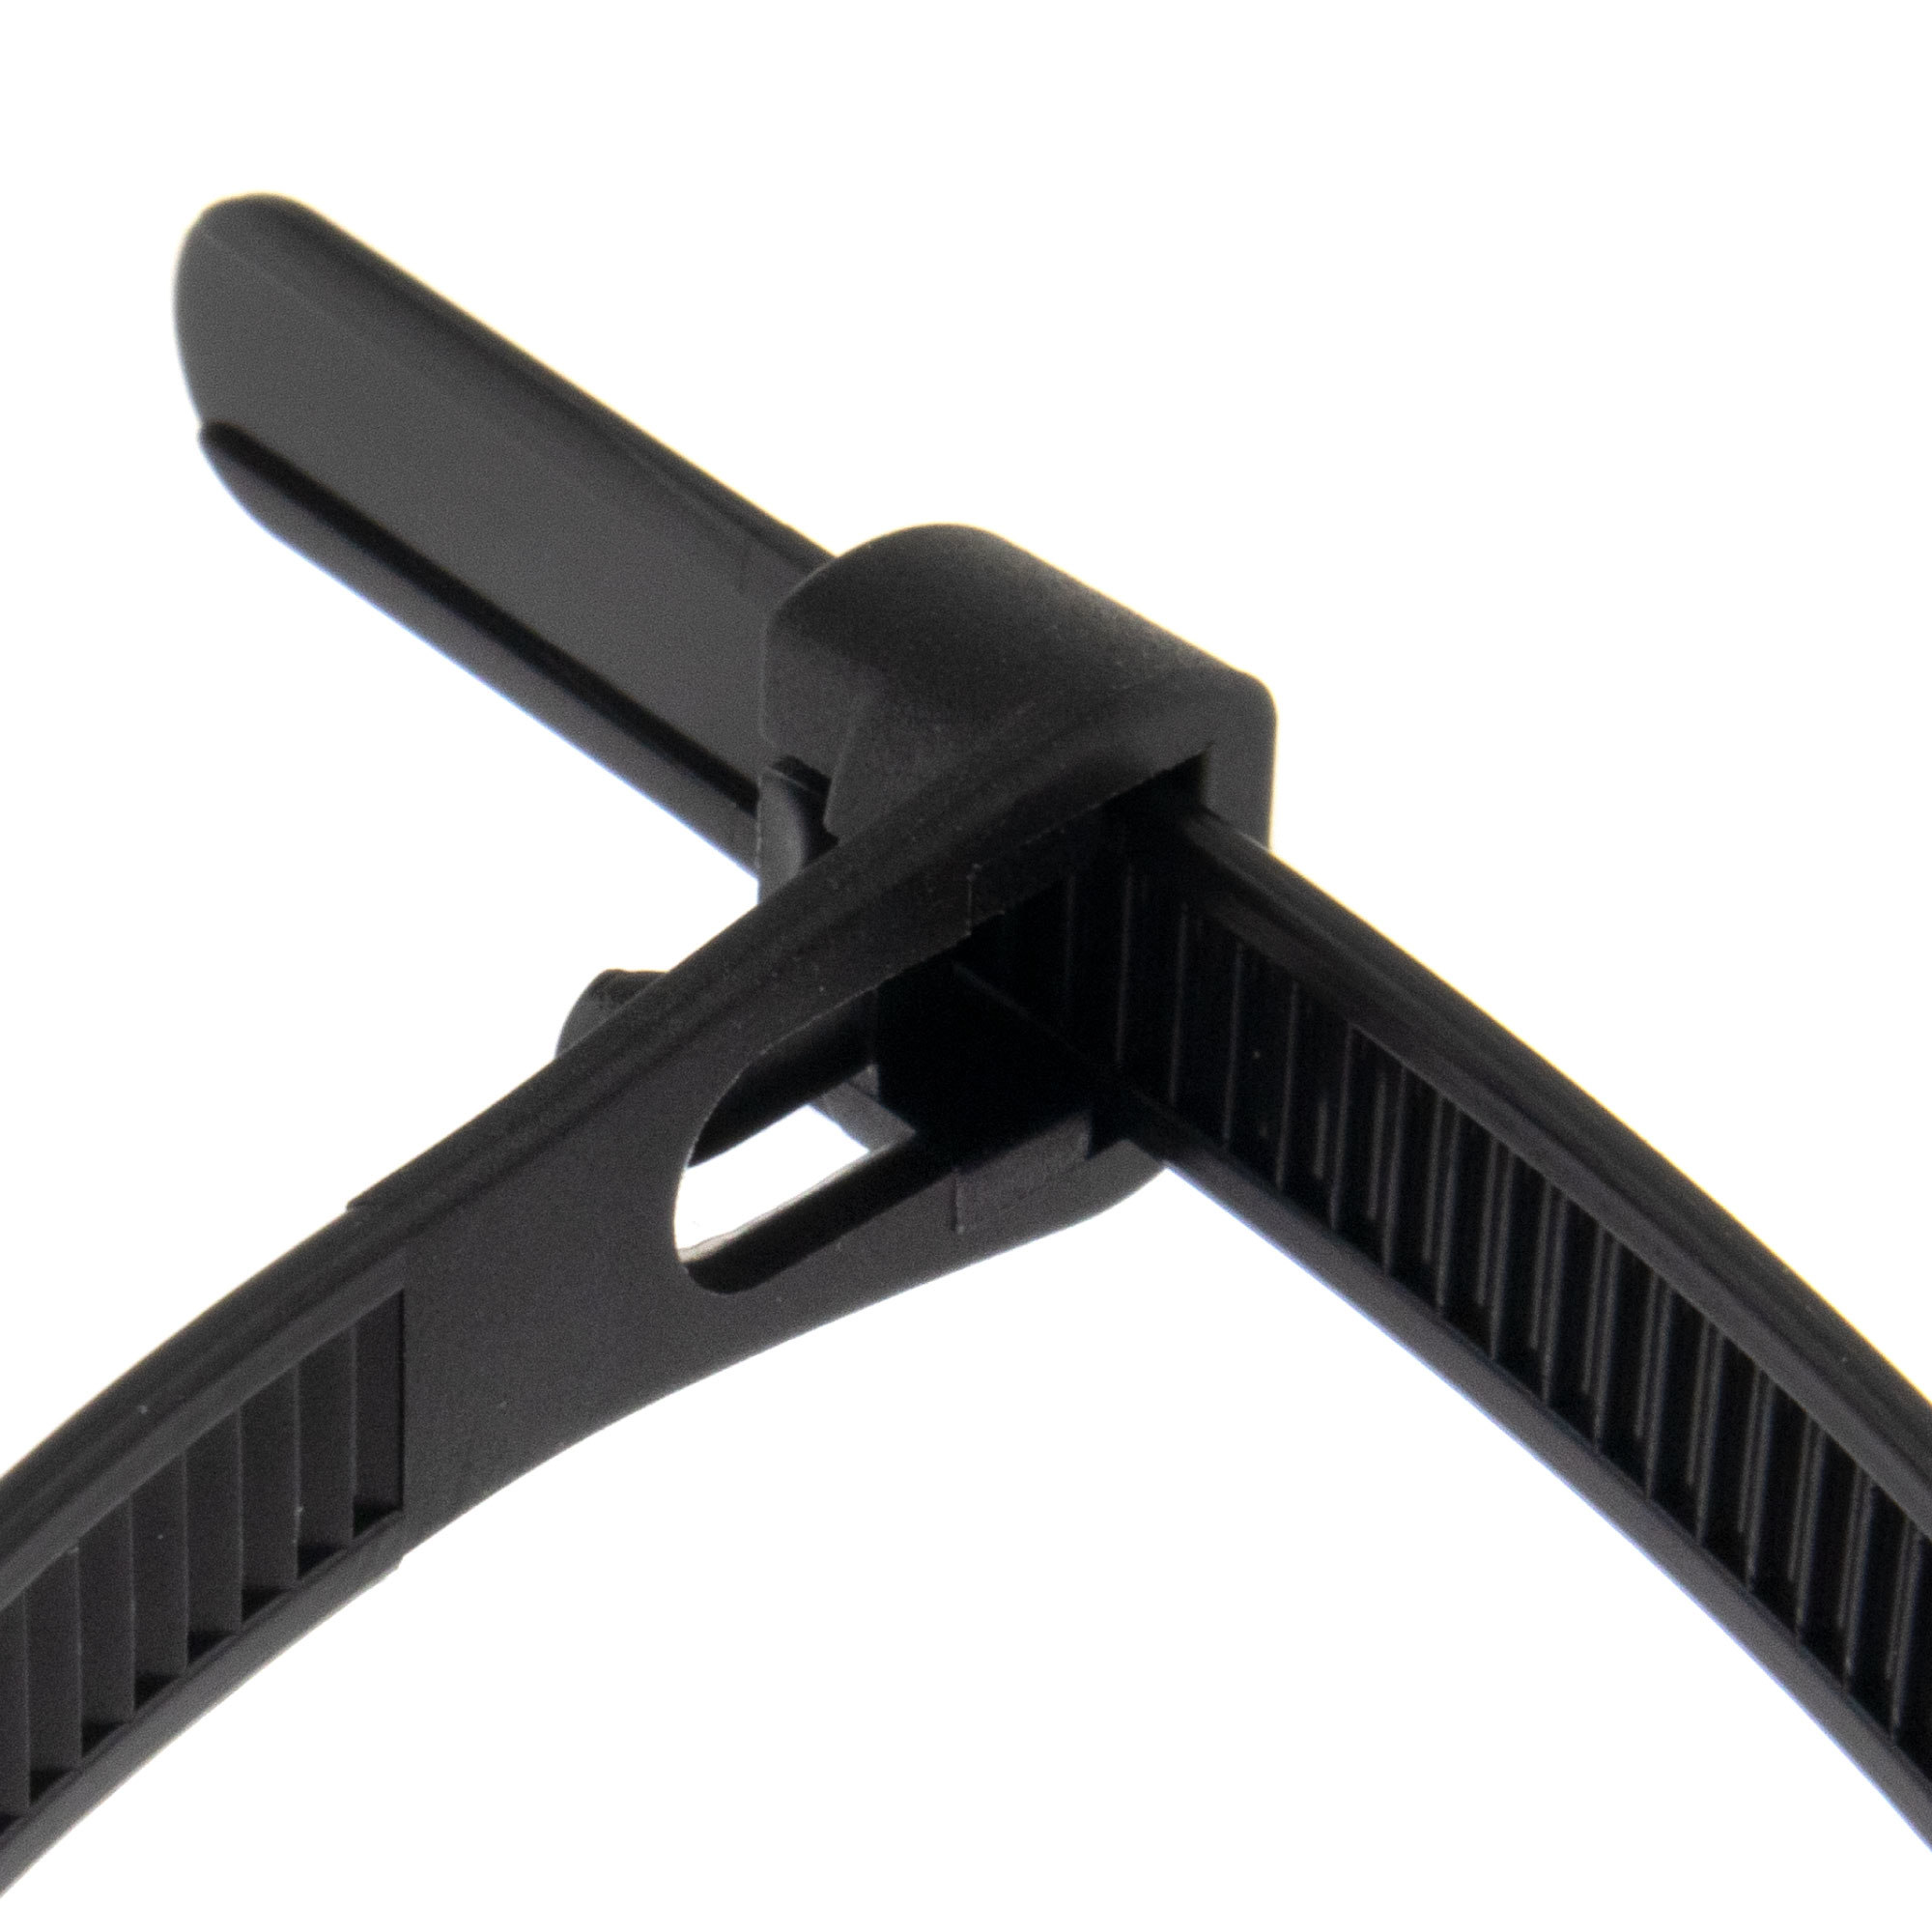 Cable tie re-use-able 150 x 7,6mm, black, 100PCS